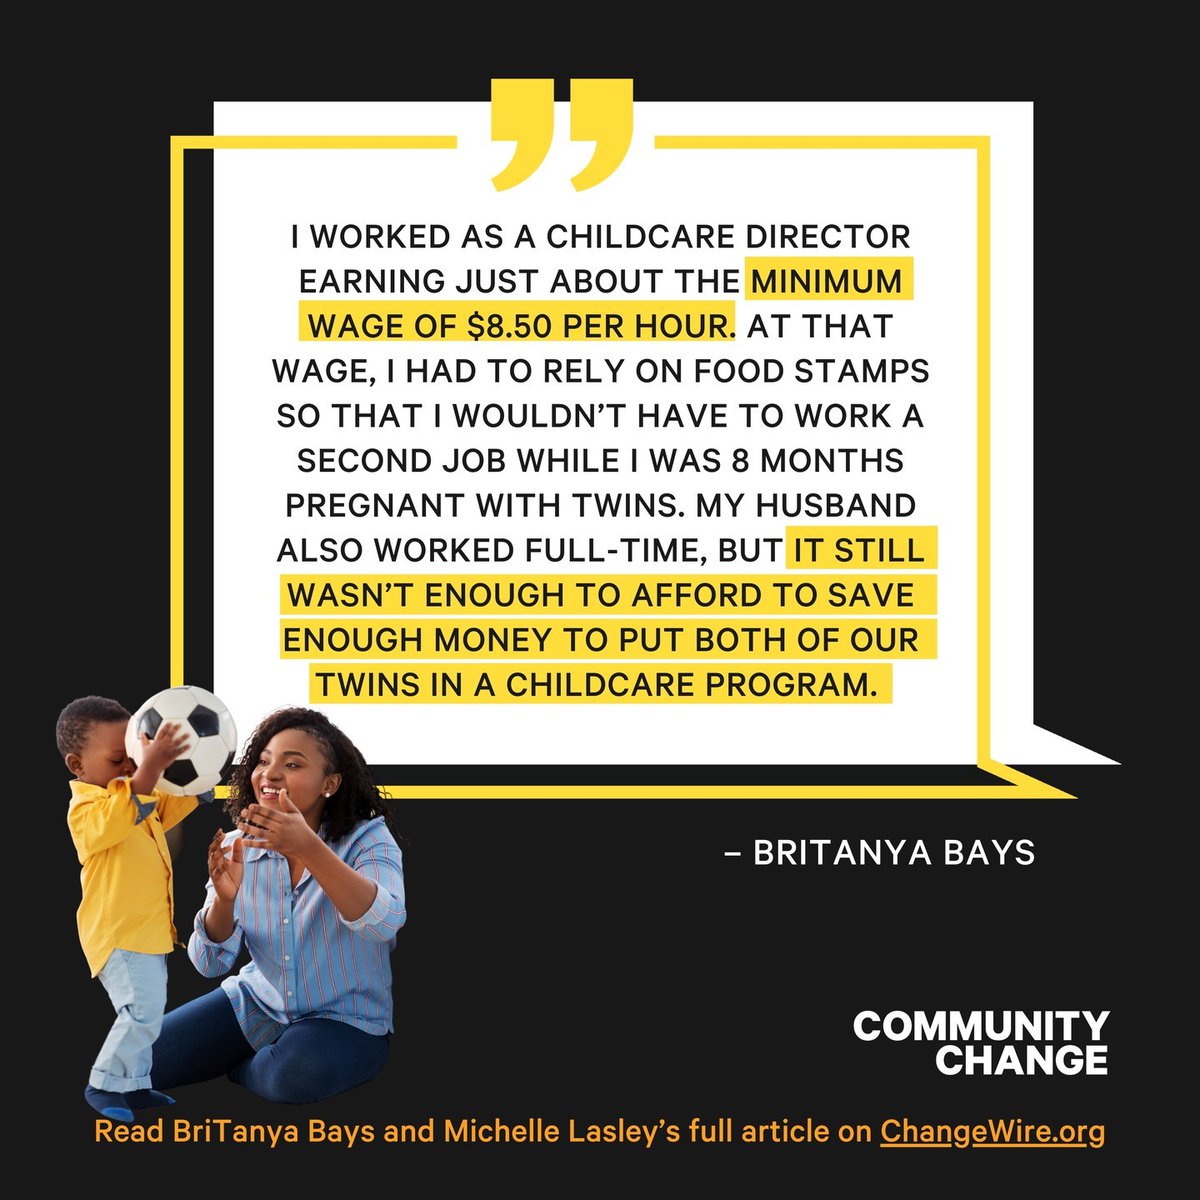 1 in 3 child care workers experience food insecurity. Childcare providers shouldn't have to worry about their next meal, while providing for the families around them. Read more on the personal story of @villageactivist and what so many care workers face 👇 bit.ly/3WUpfFS